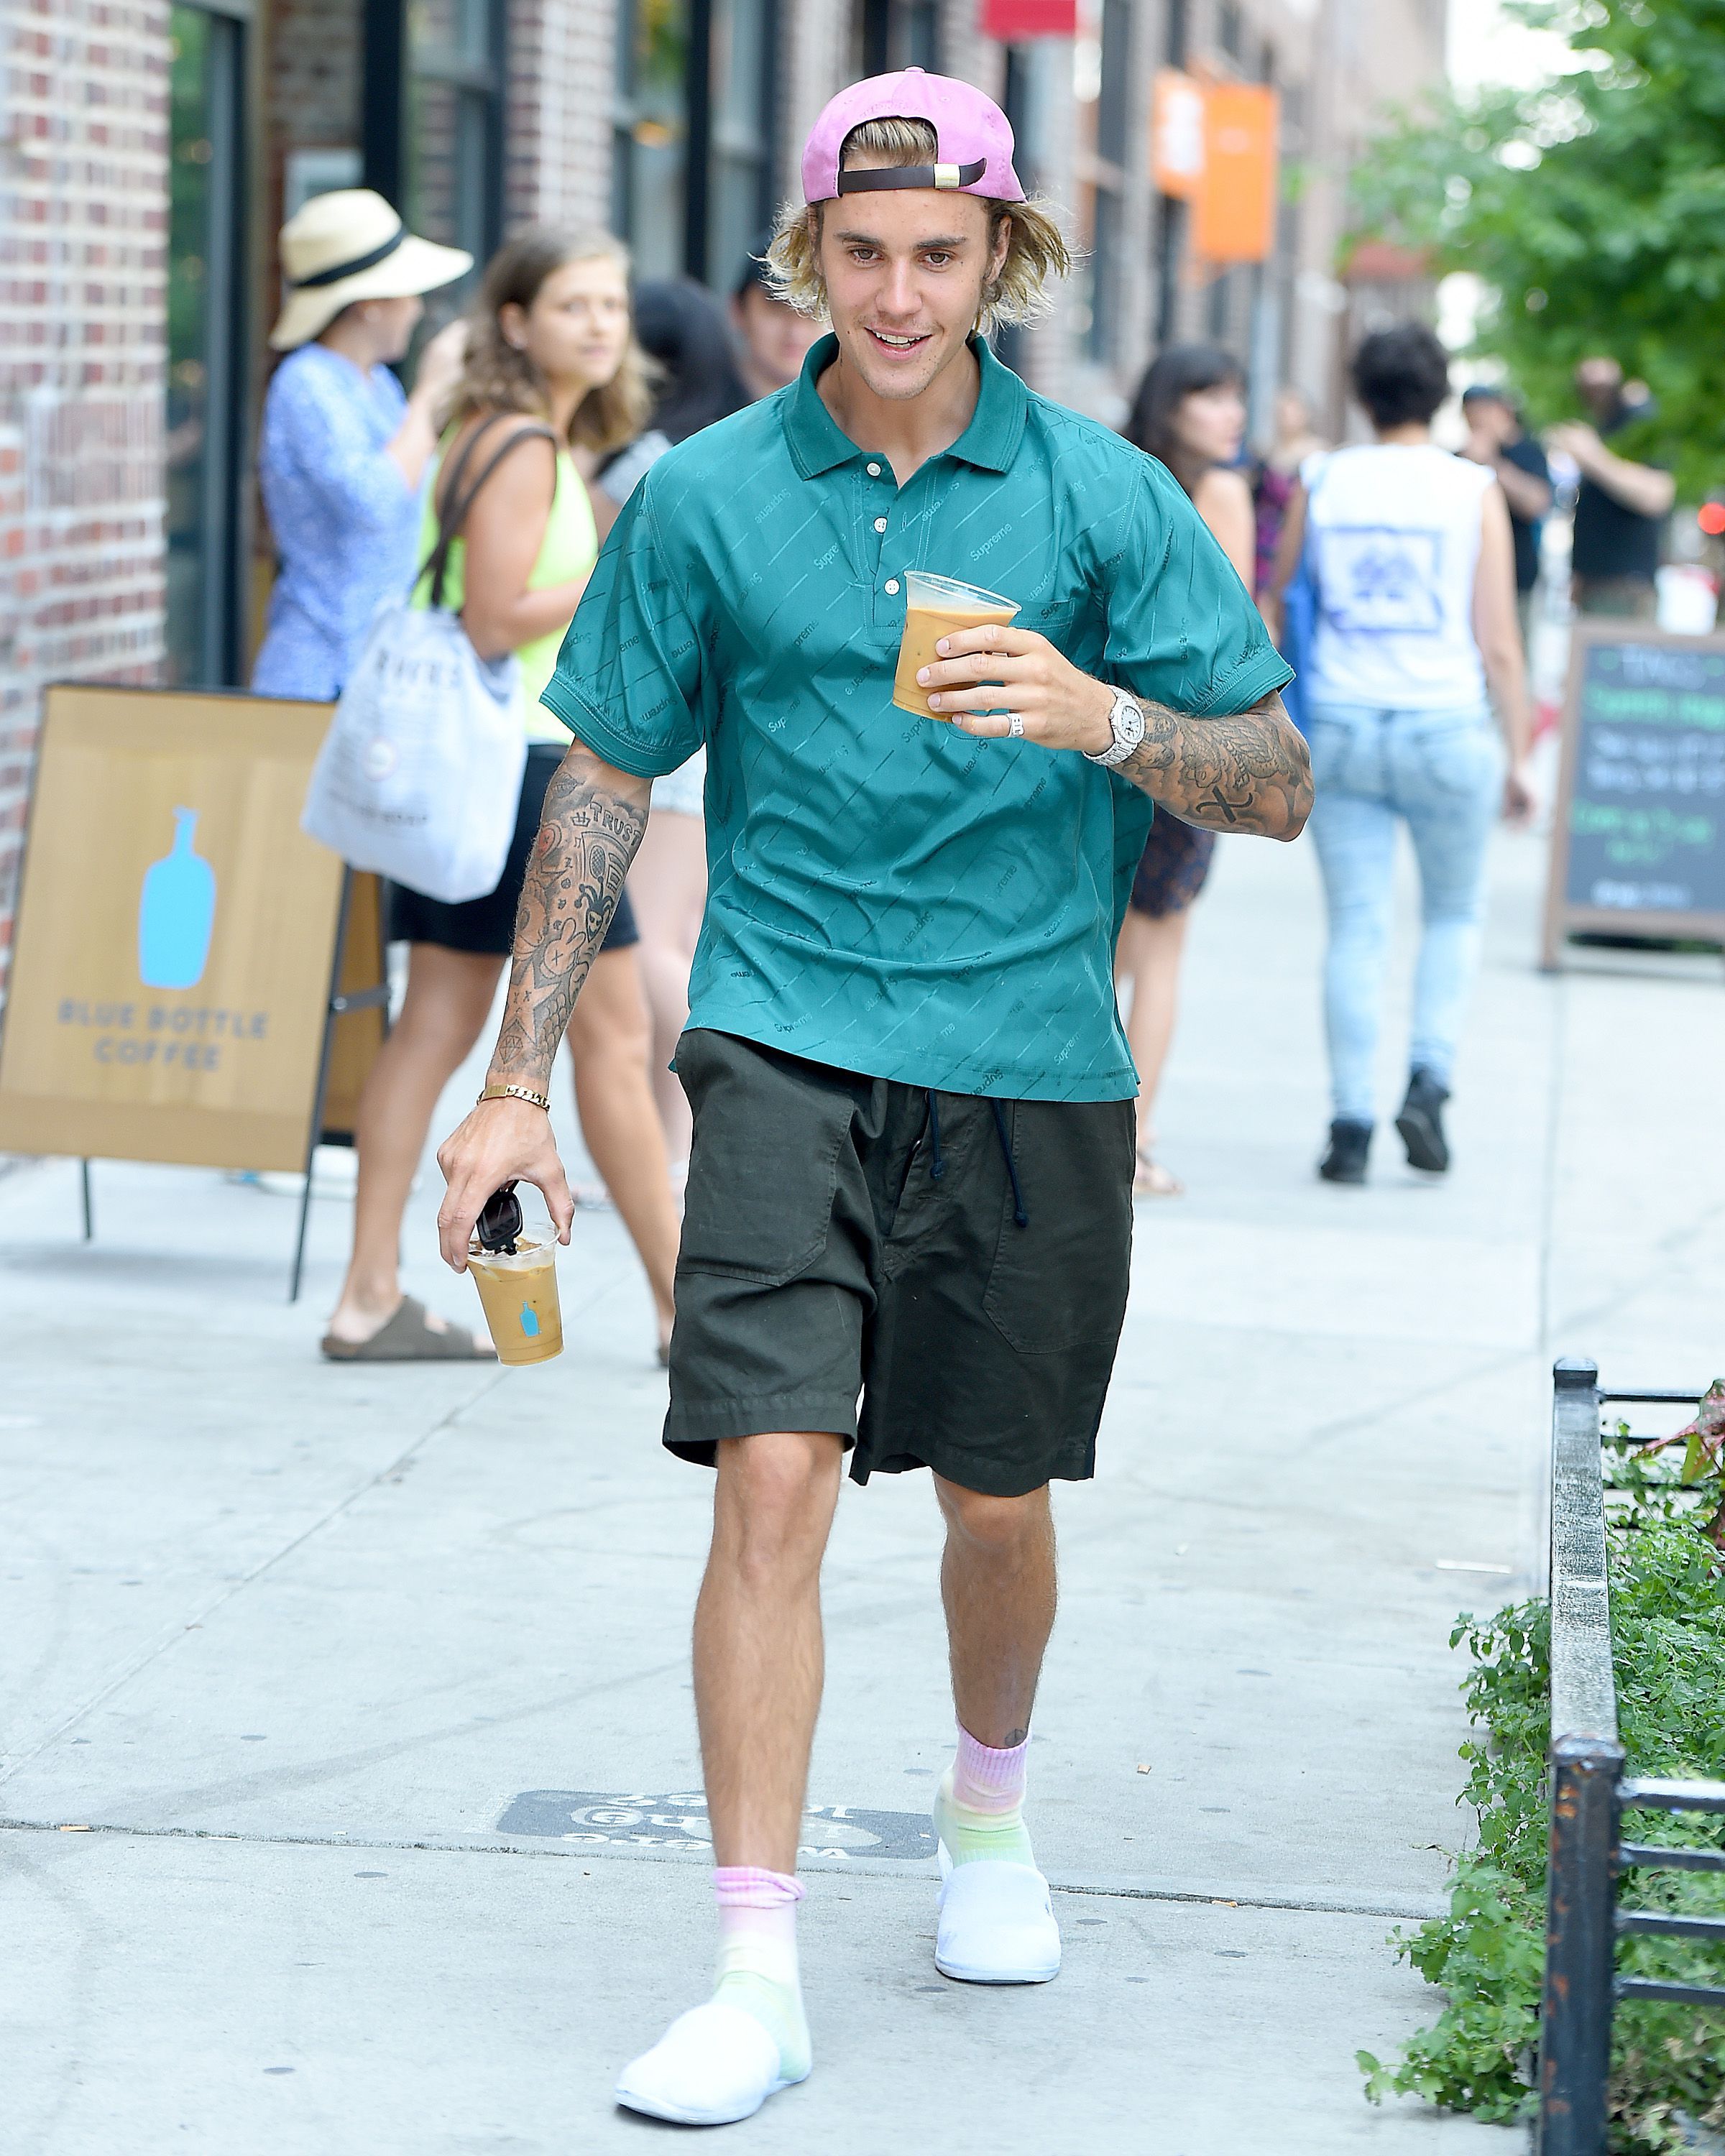 9 Explanations For Justin Bieber's Hotel Slippers